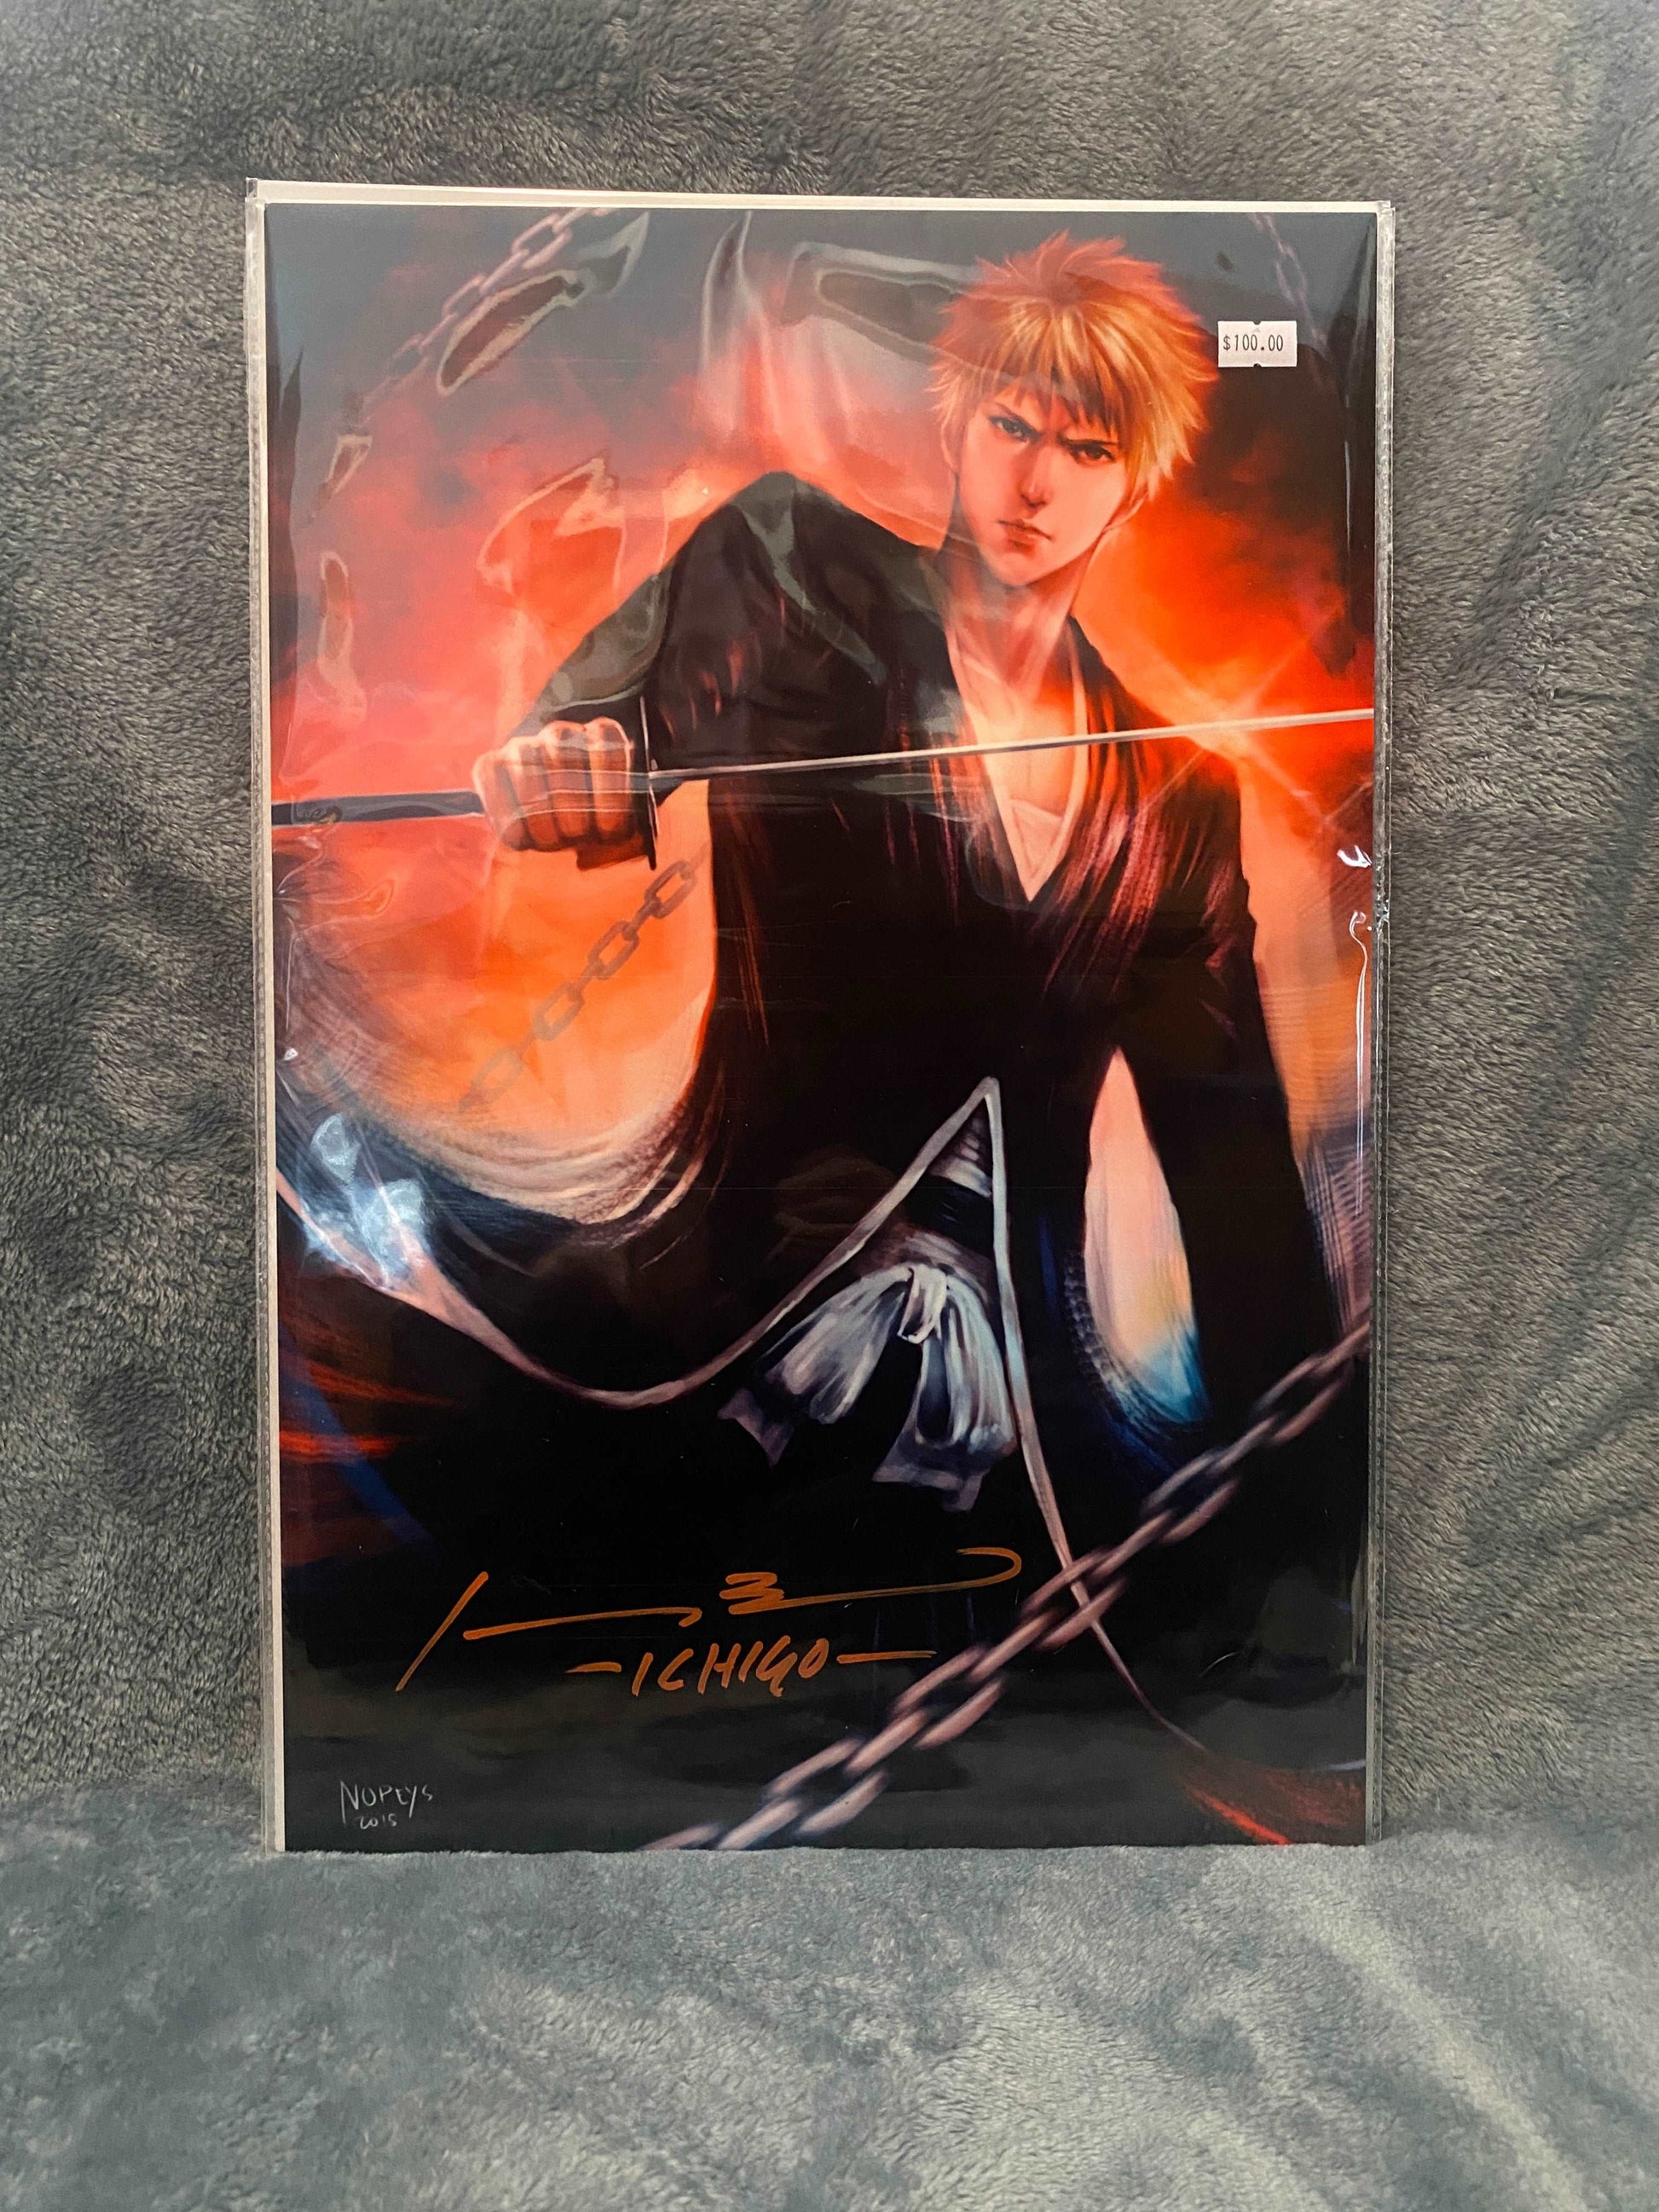 12x18 Metal Print Ichigo signed by Johnny Yong Bosch - Snapping Turtle Gallery